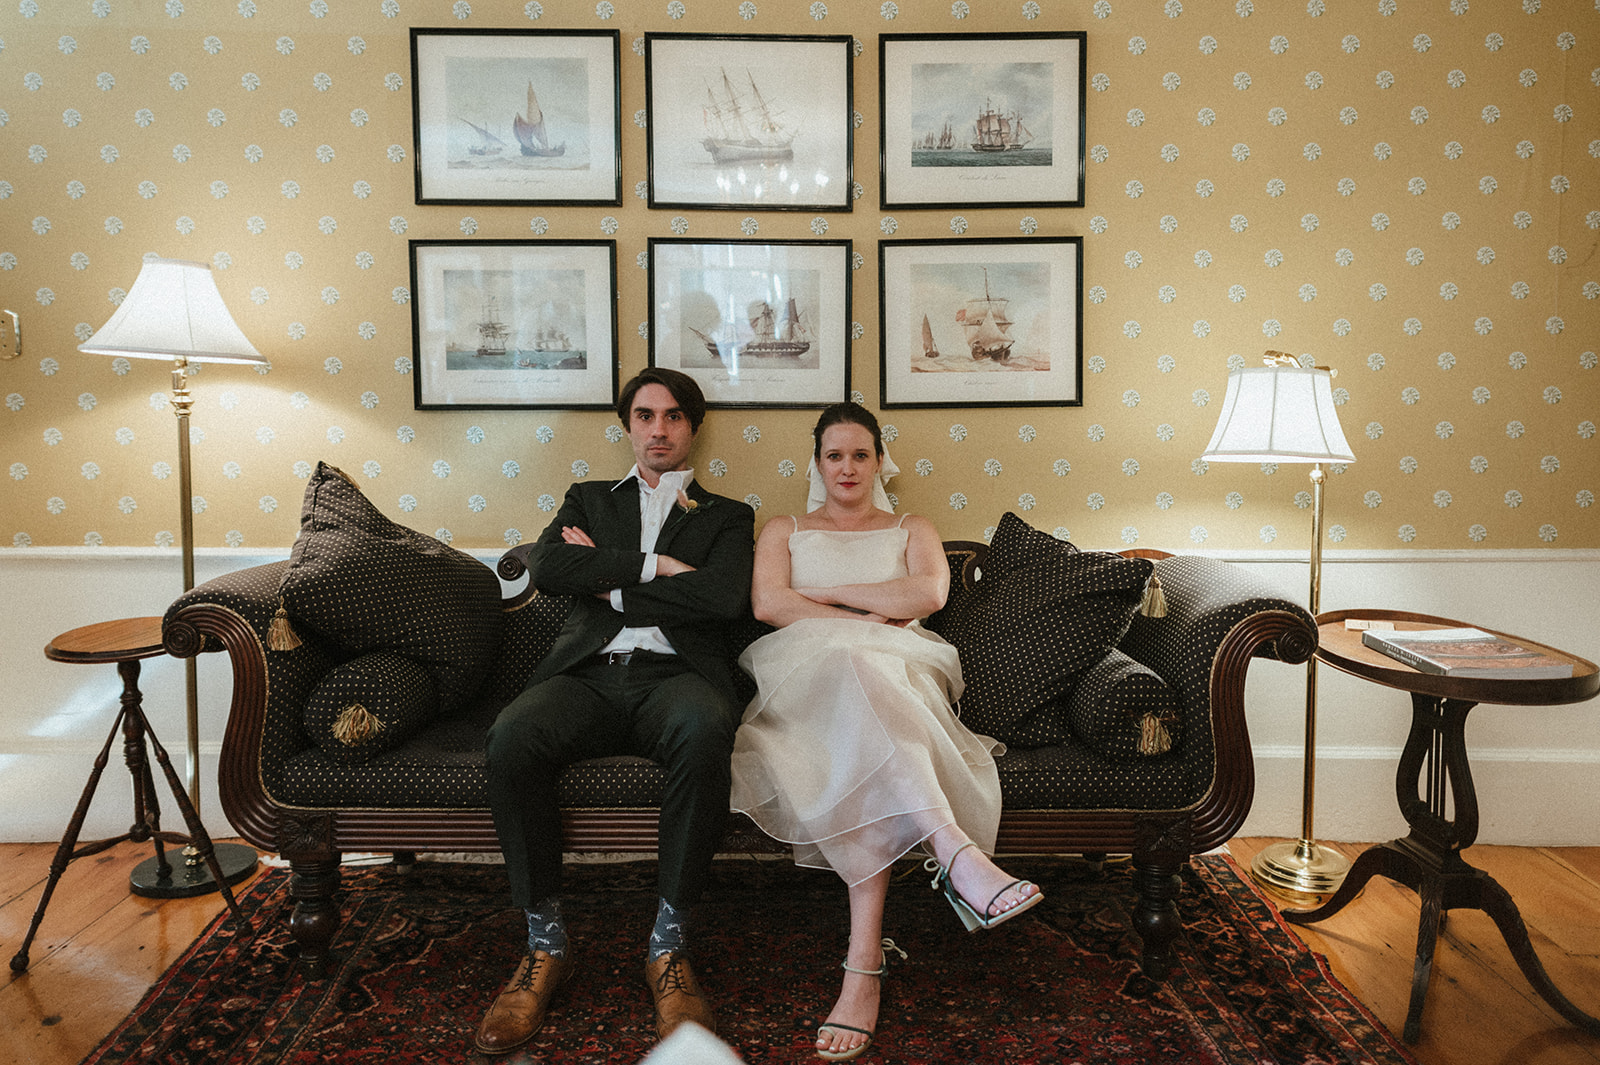 Bride and groom pose for portrait during Wes Anderson inspired wedding at Hamilton Hall in Salem Massachusetts